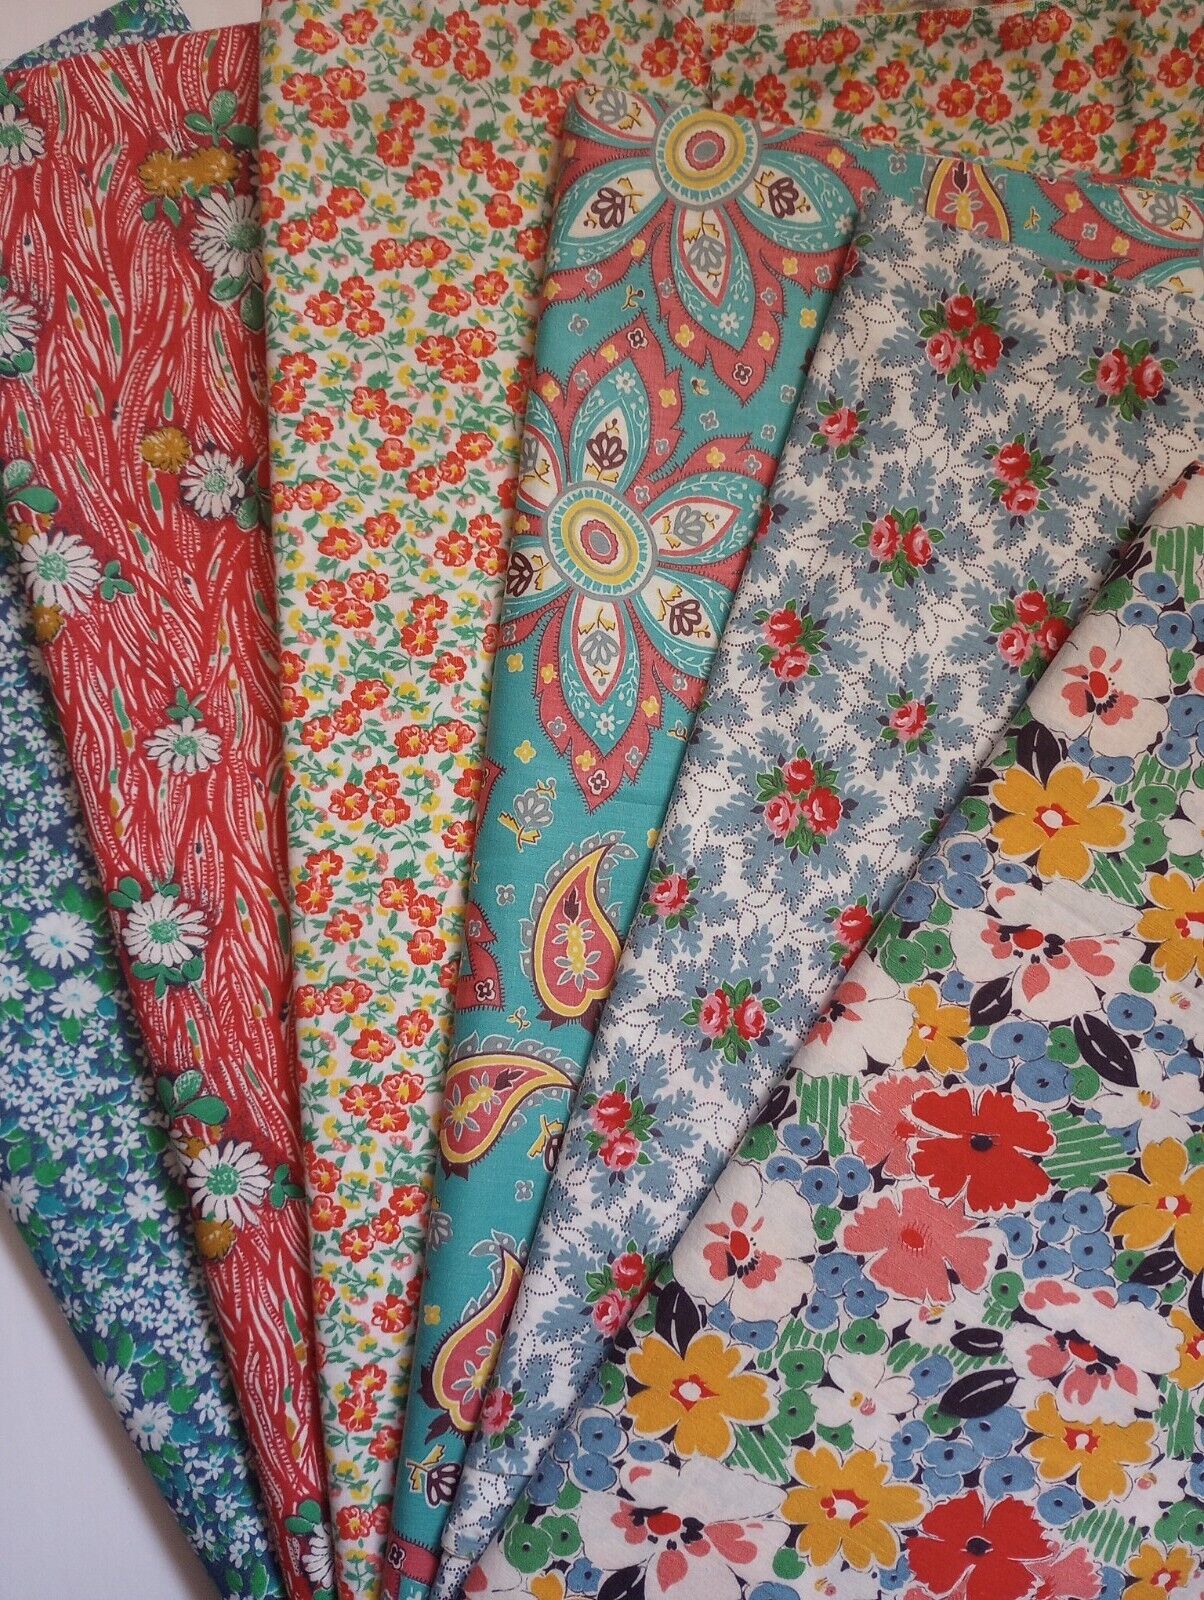 Vintage 40s 50s FABRIC Florals Quilting Fabric Half Yard Cuts 3 Yds Lot Of 6